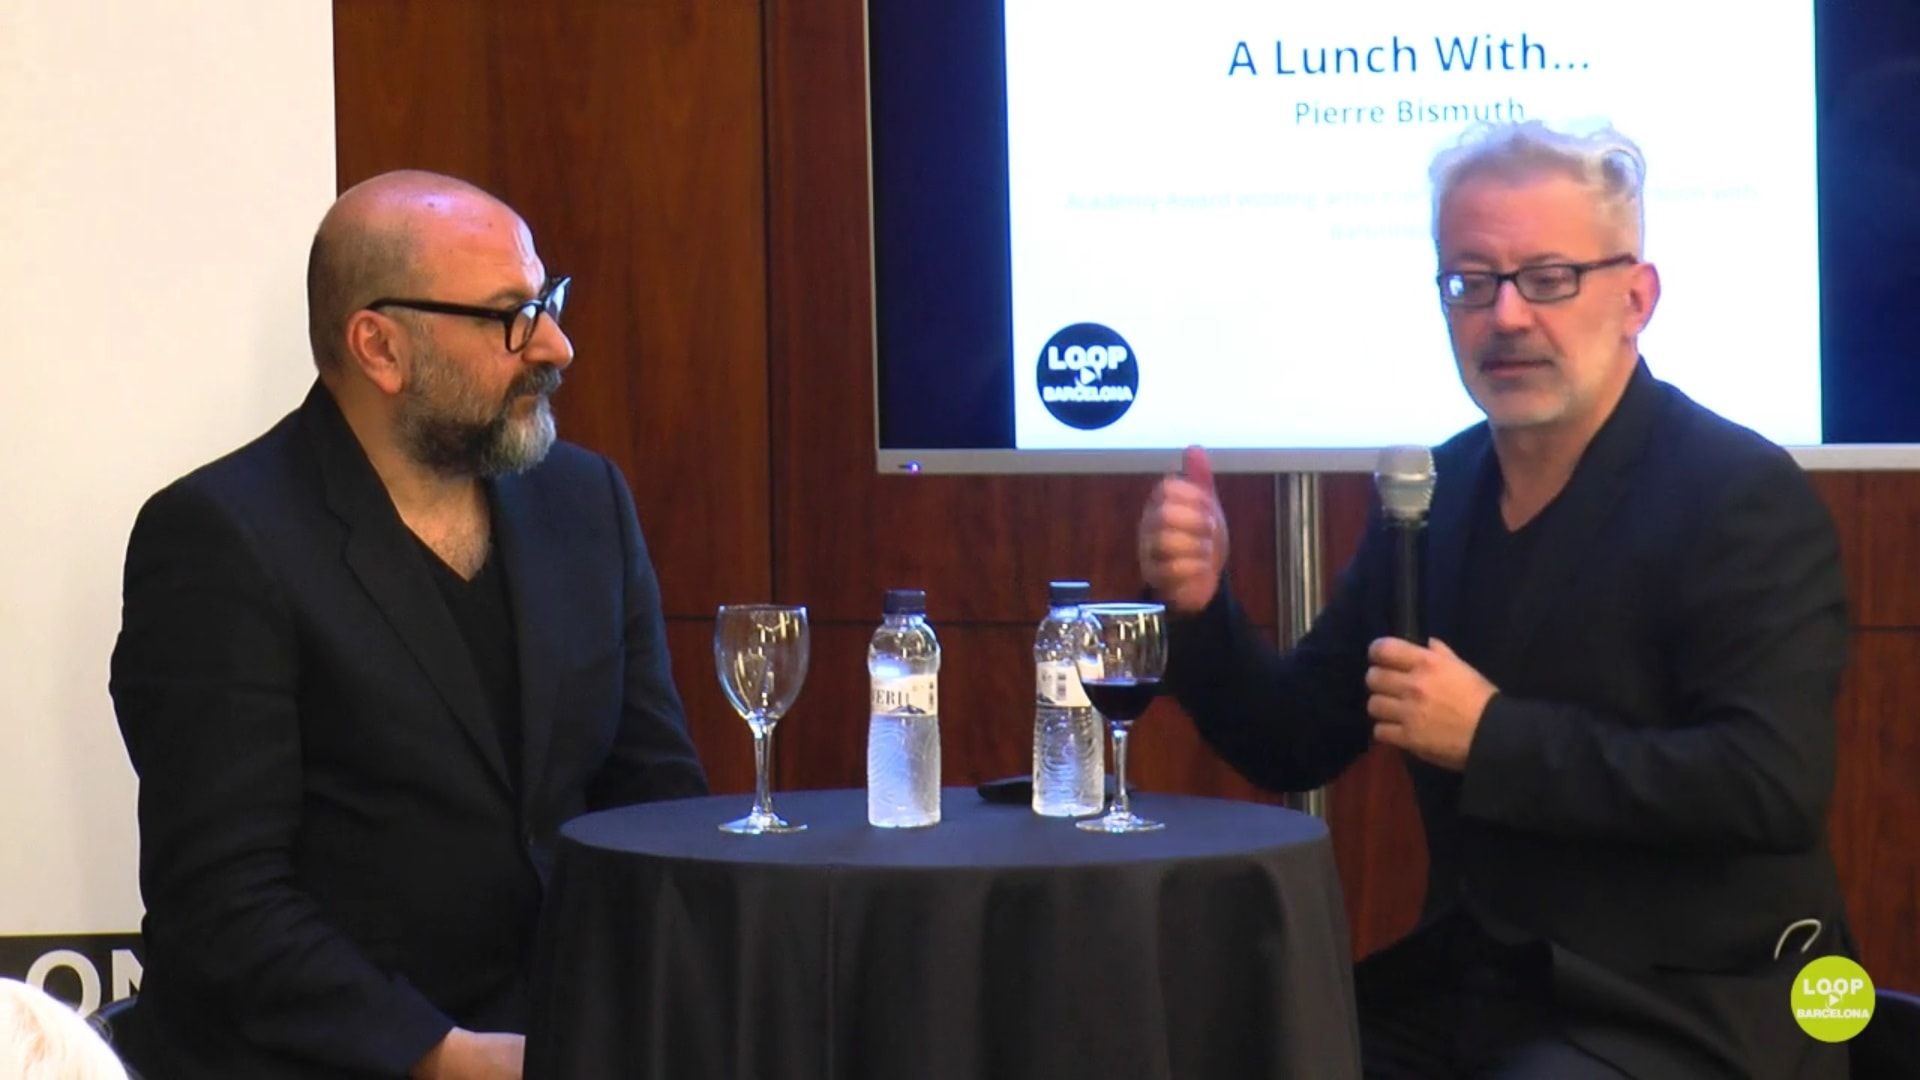 ‘A Lunch with…Pierre Bismuth’ – Pierre Bismuth in conversation with curator Bartomeu Marí